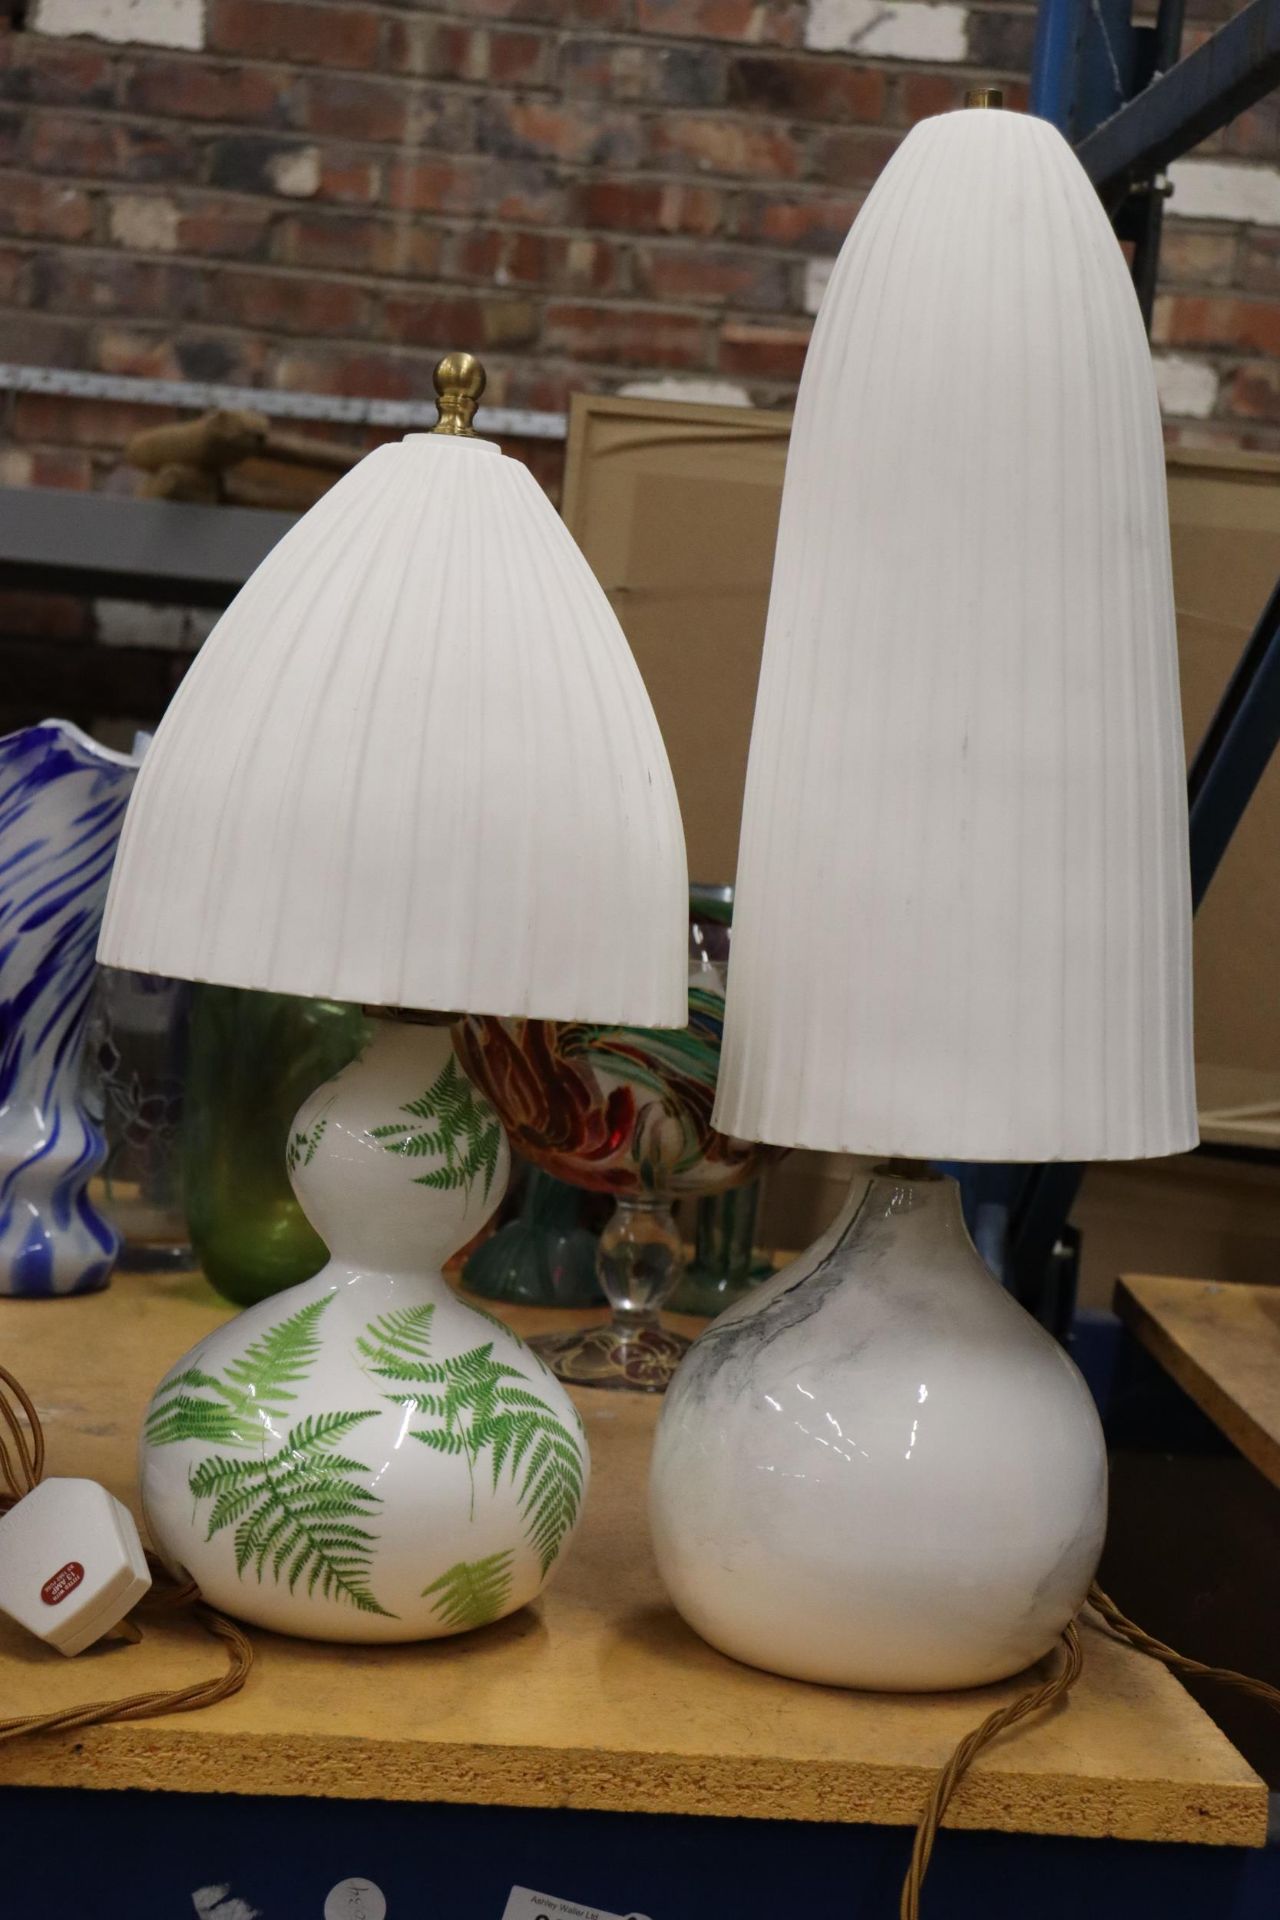 TWO CERAMIC TABLE LAMPS WITH CERAMIC SHADES